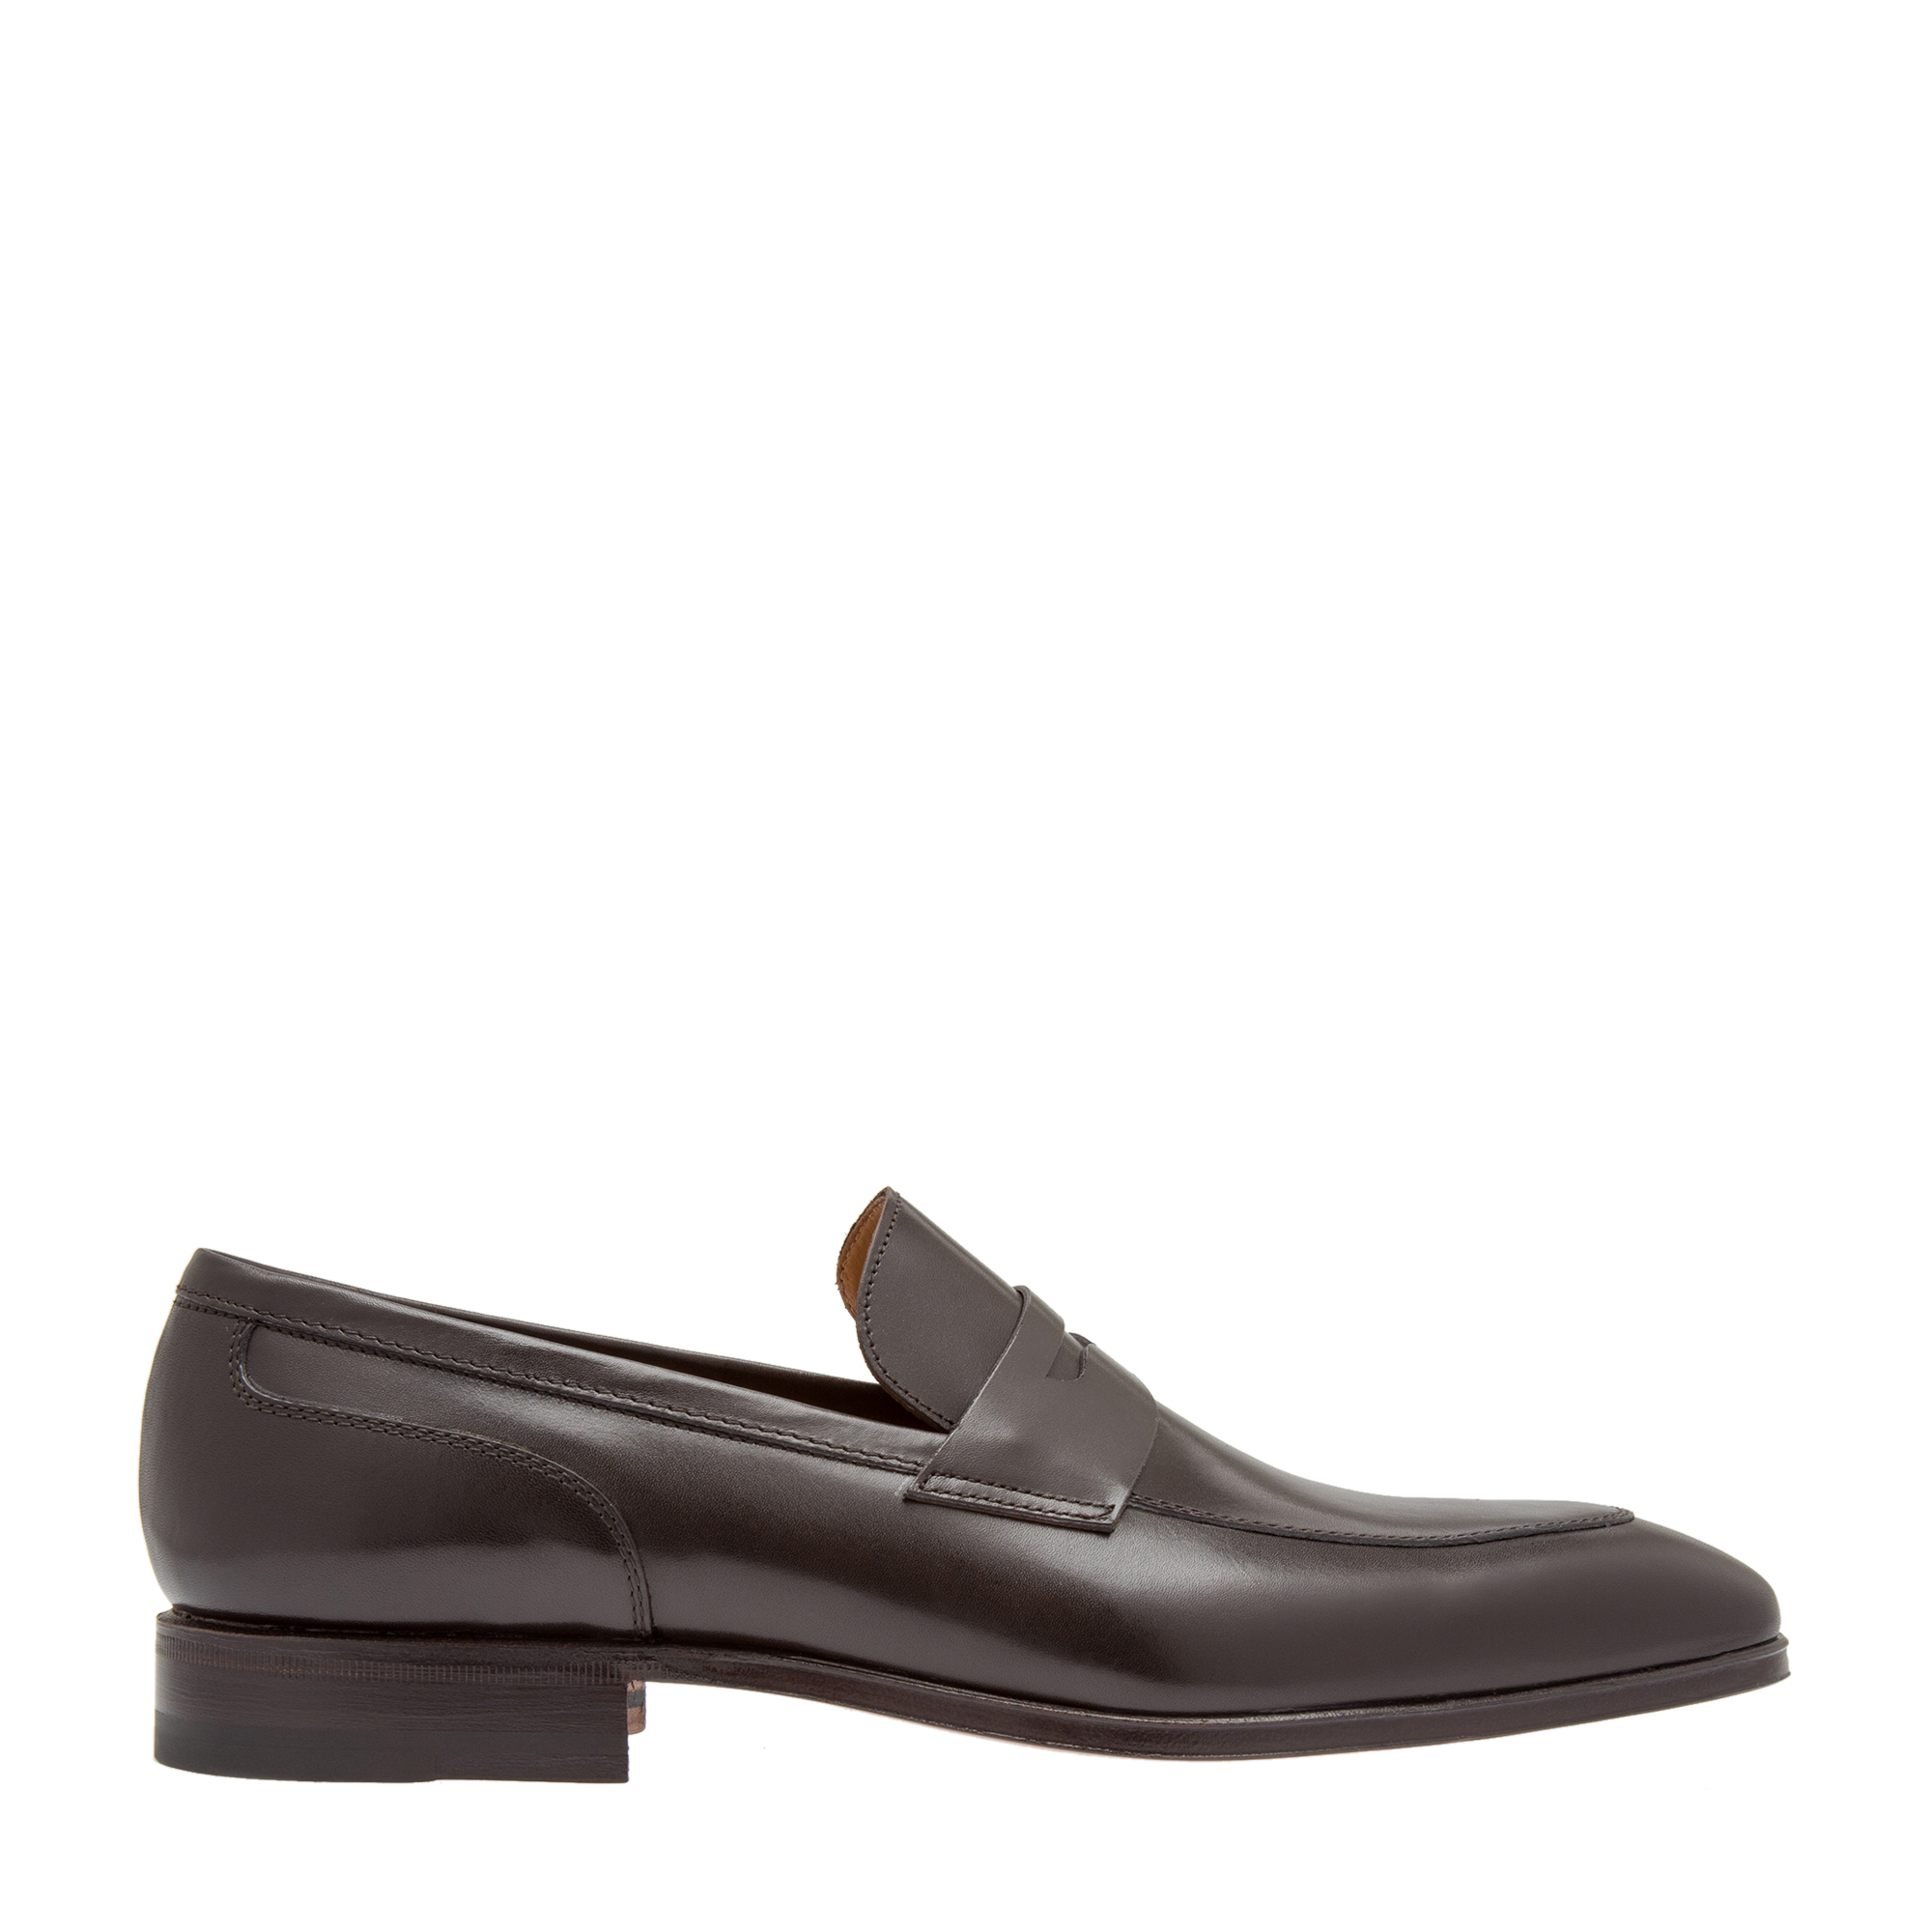 Pisa leather loafers